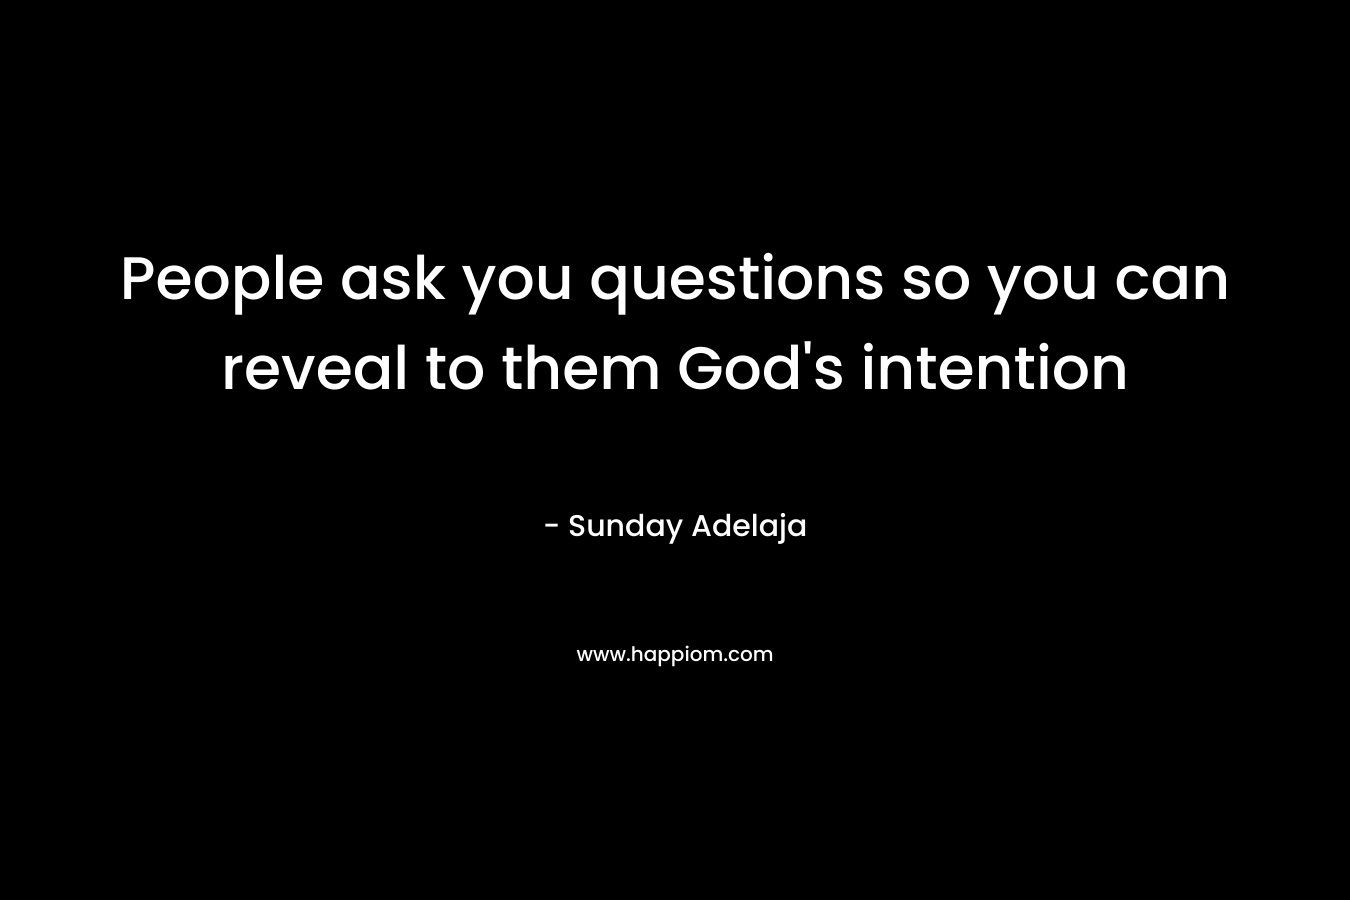 People ask you questions so you can reveal to them God's intention